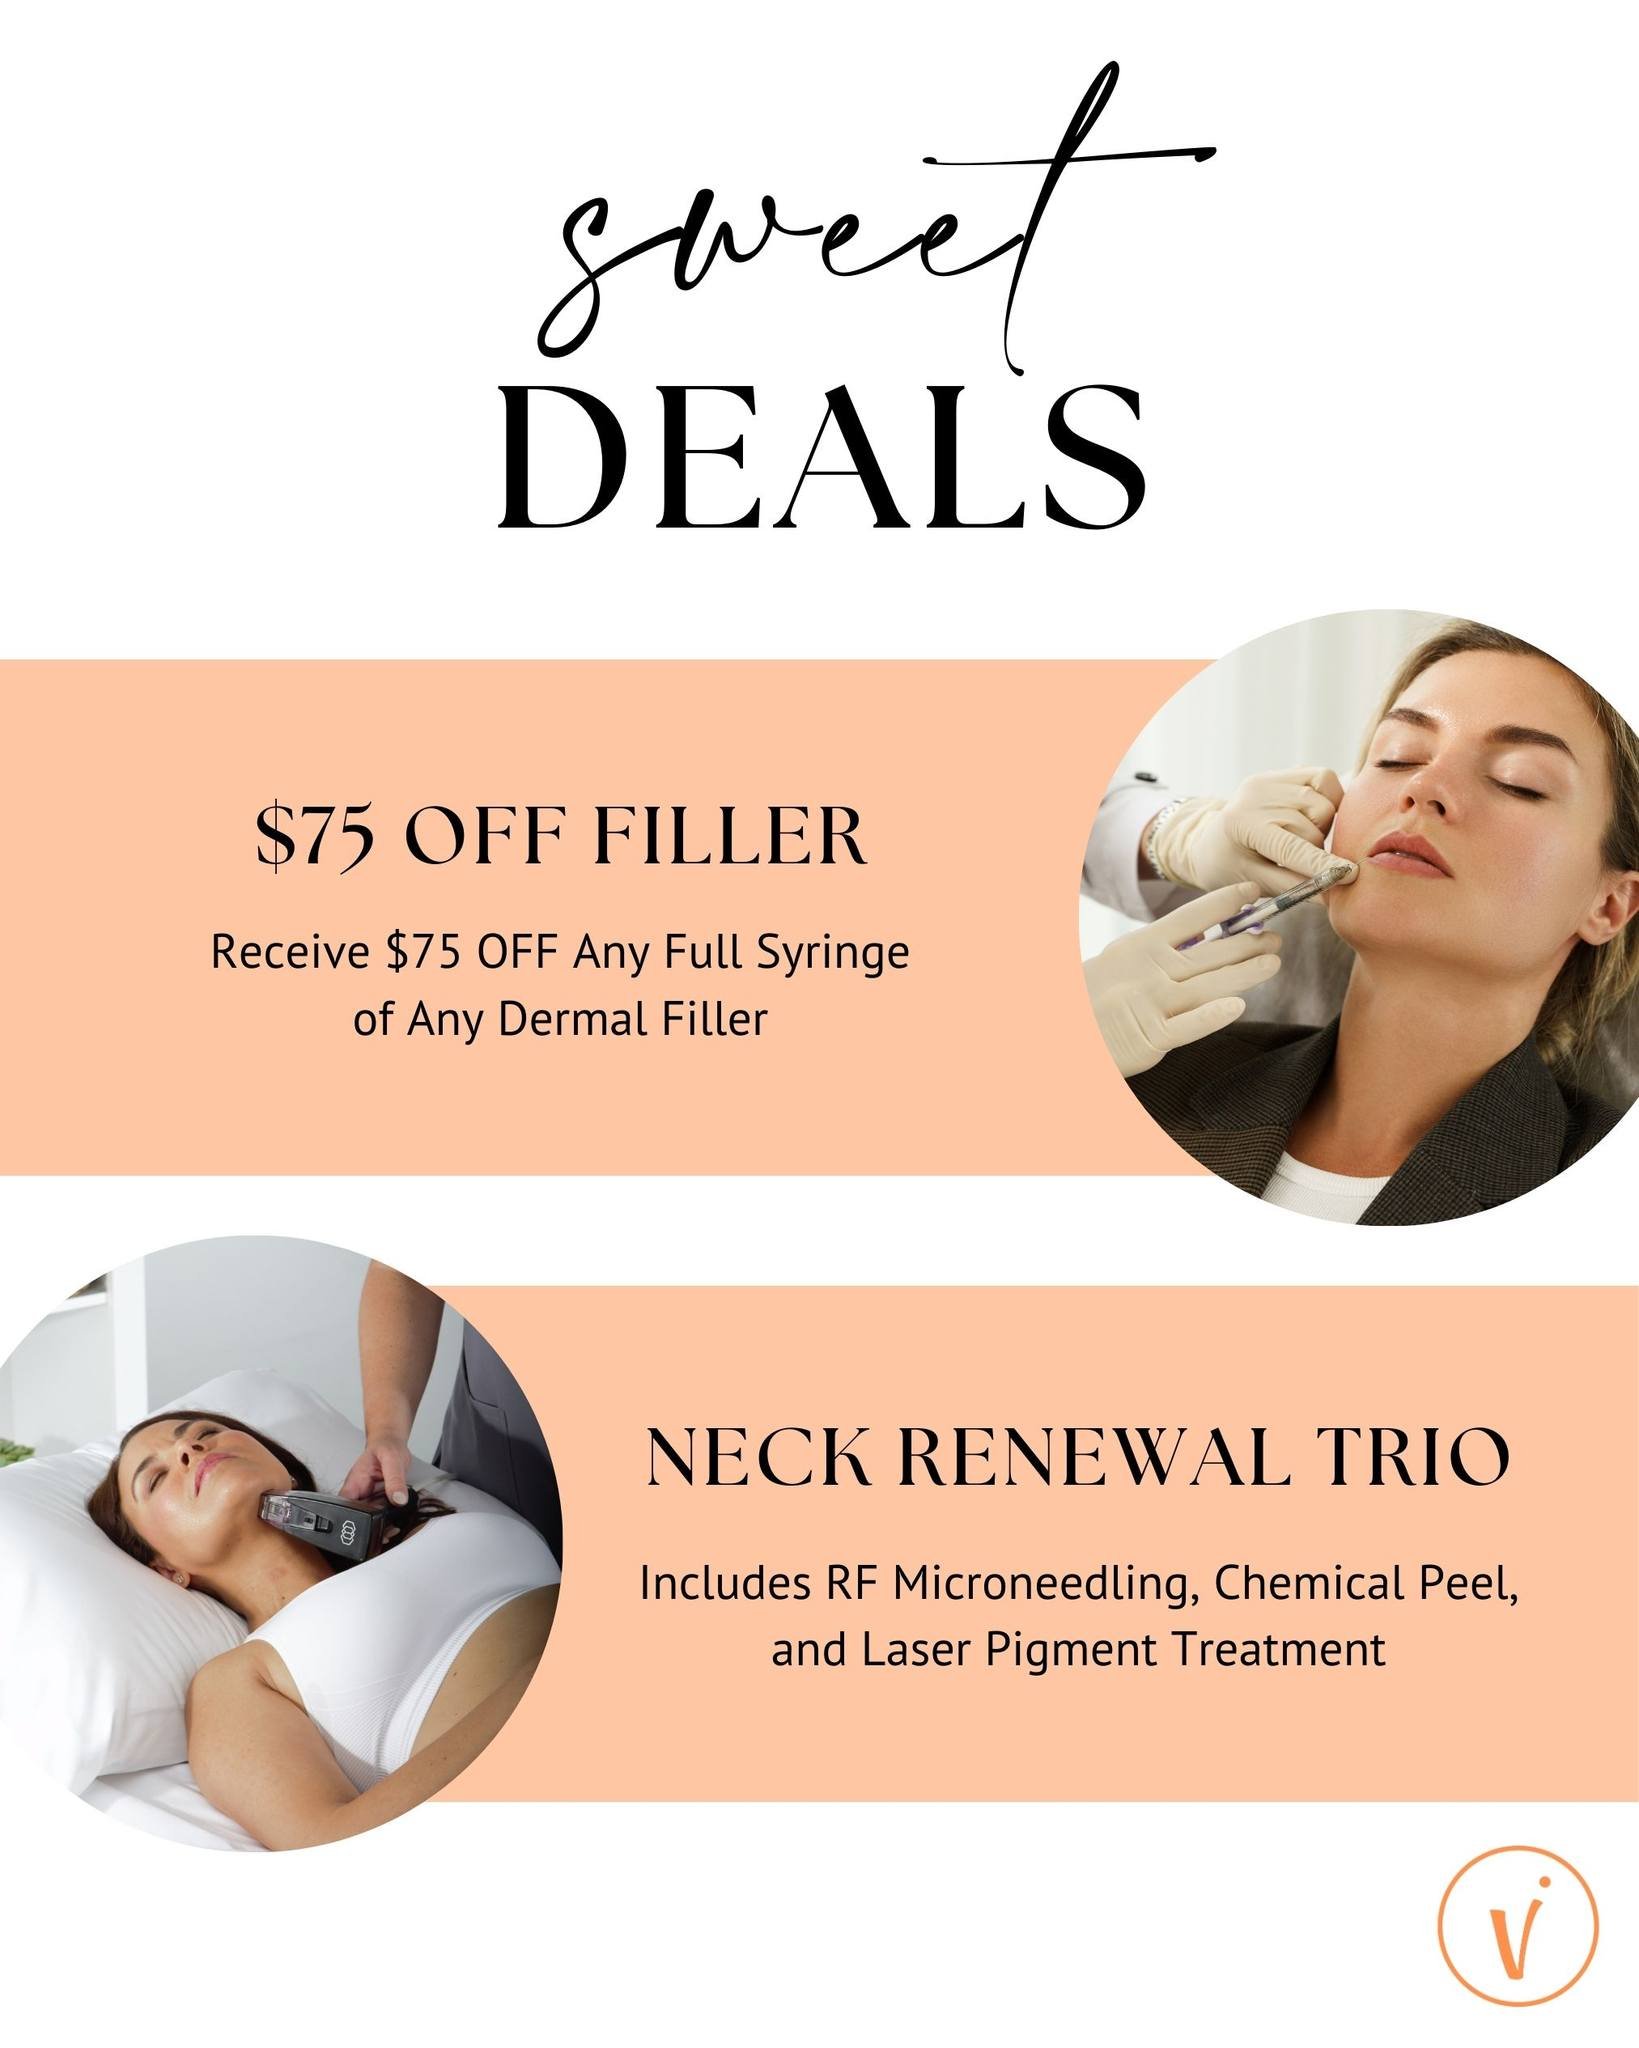 Book Now, Treat Later! Today is the last day you can book a filler appointment and take advantage of our $75 off promotion!! 

But don't worry because our second Sweet Deal isn't going anywhere! Get ready for tank top weather with our Neck Renewal Tr